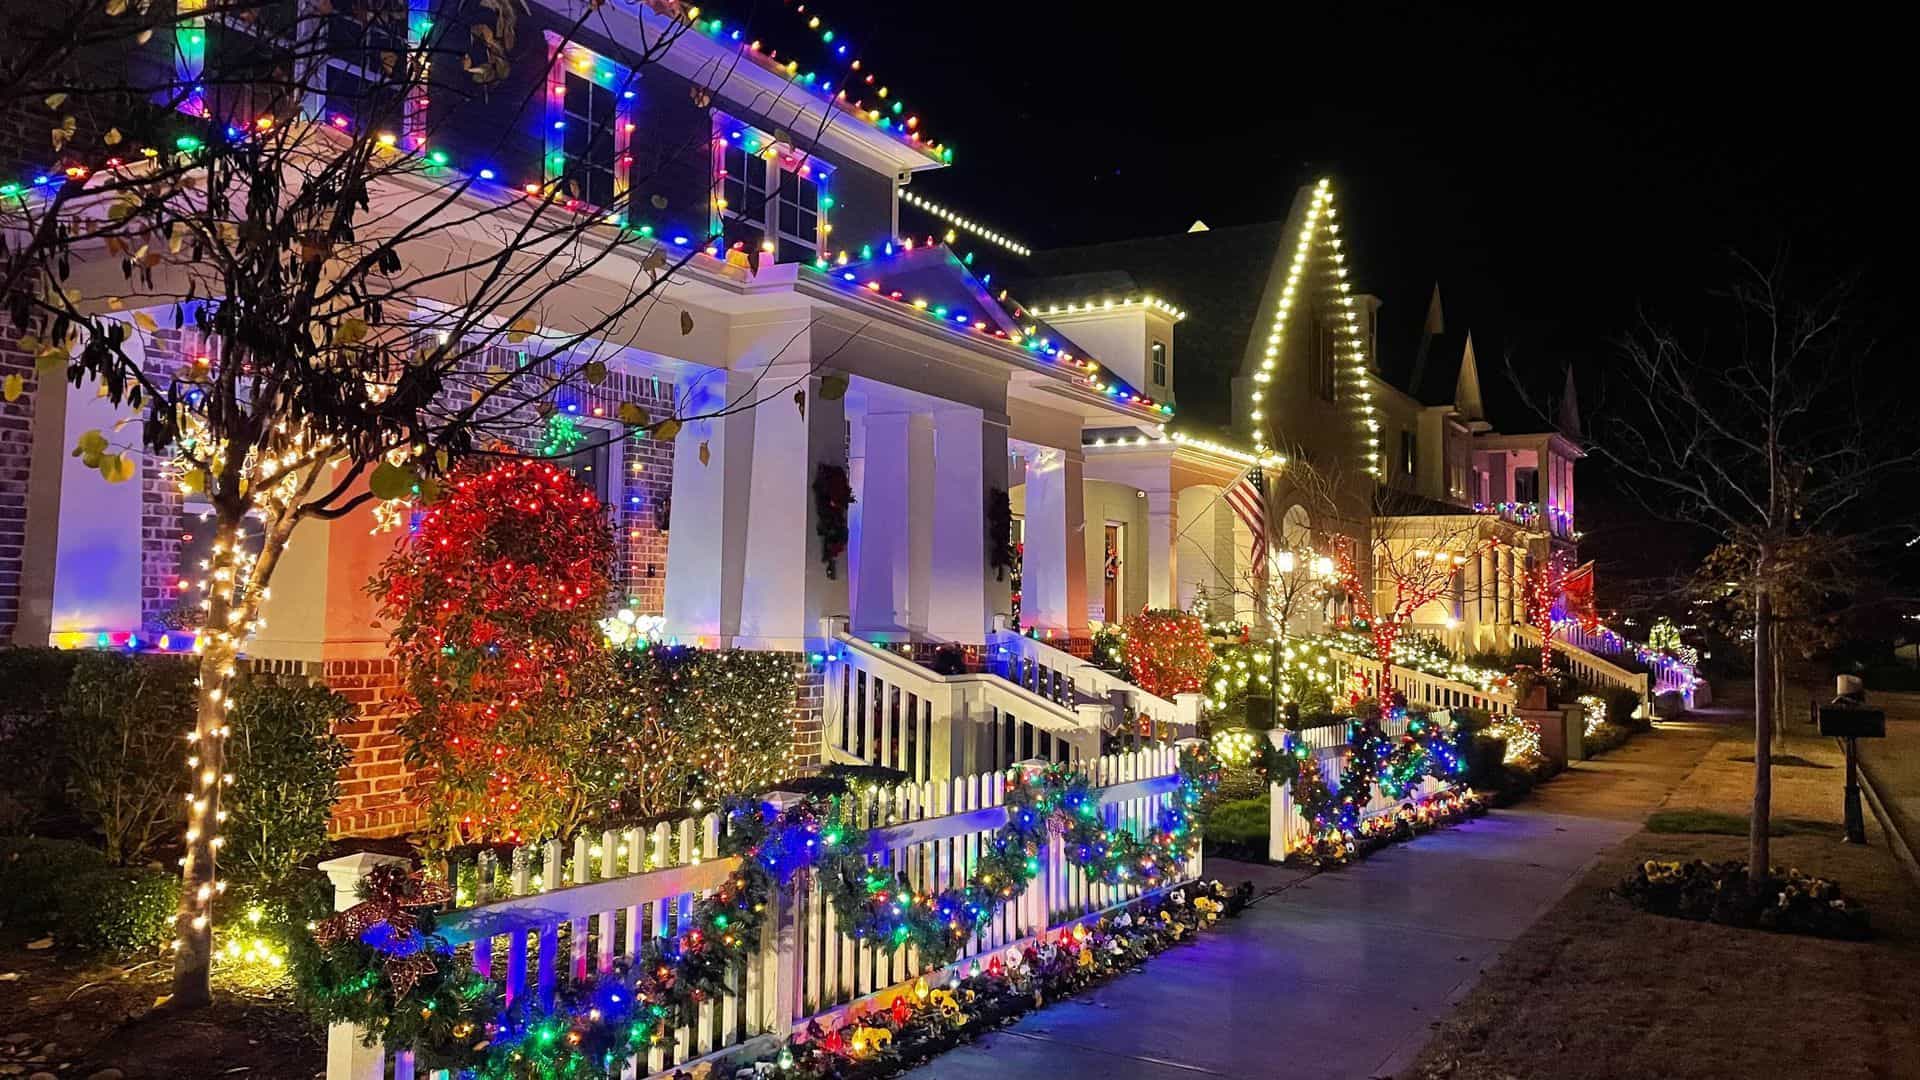 Experience the Magic of Christmas Lights in McKinney Texas!